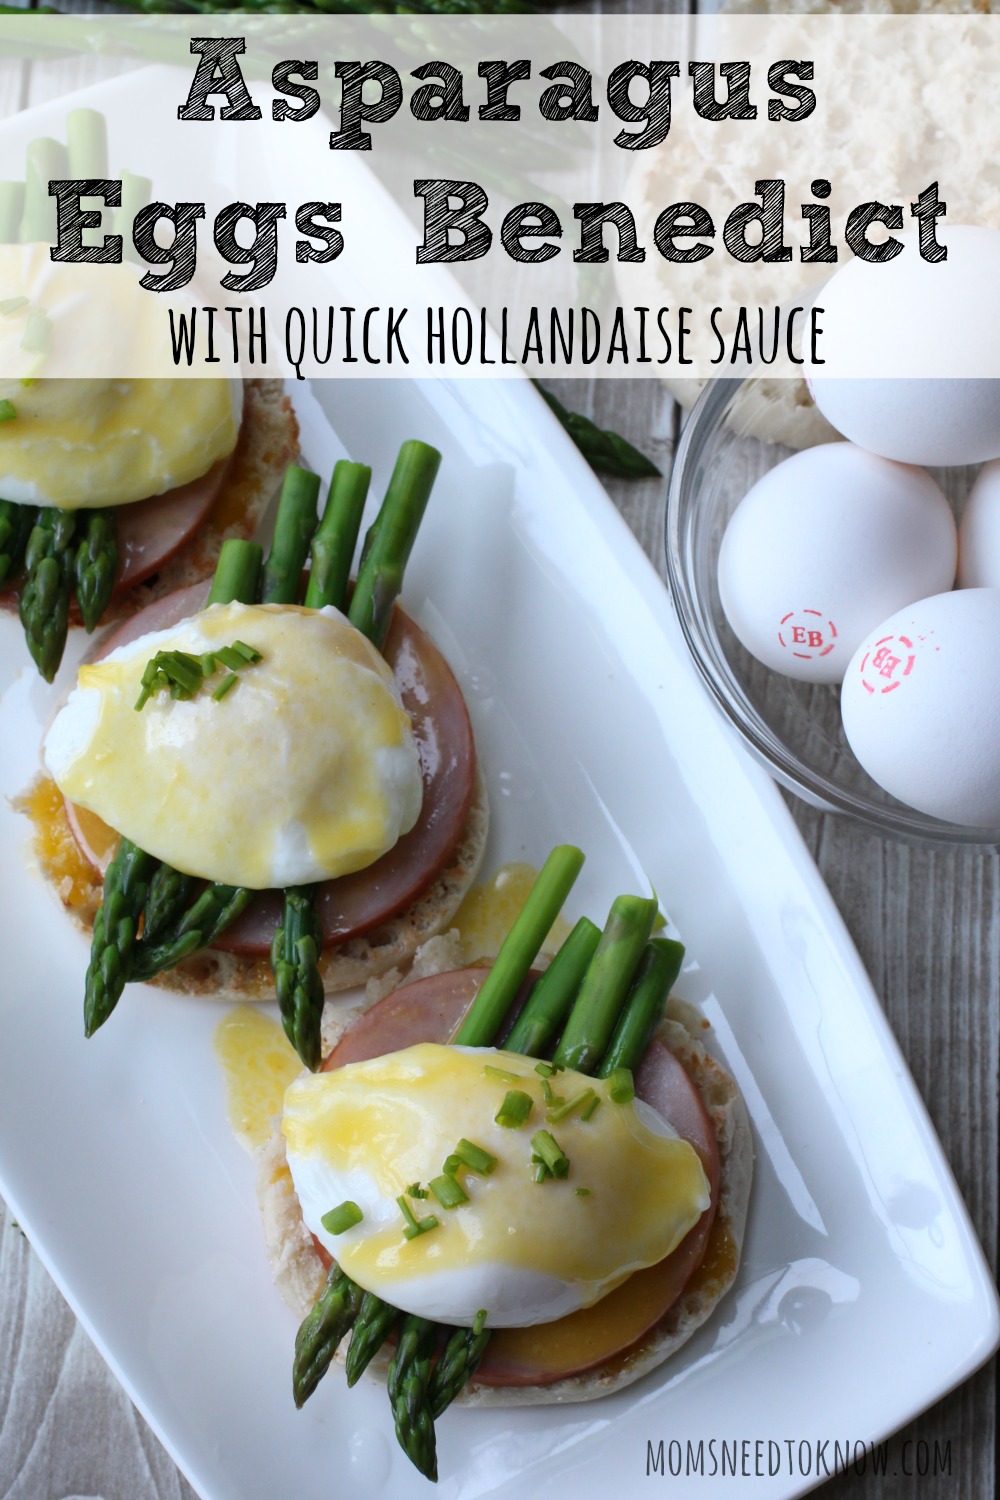 These Asparagus Eggs Benedict are so easy to make when you try my blender Hollandaise sauce. The addition of asparagus to this Eggs Benedict recipe adds so much flavor!